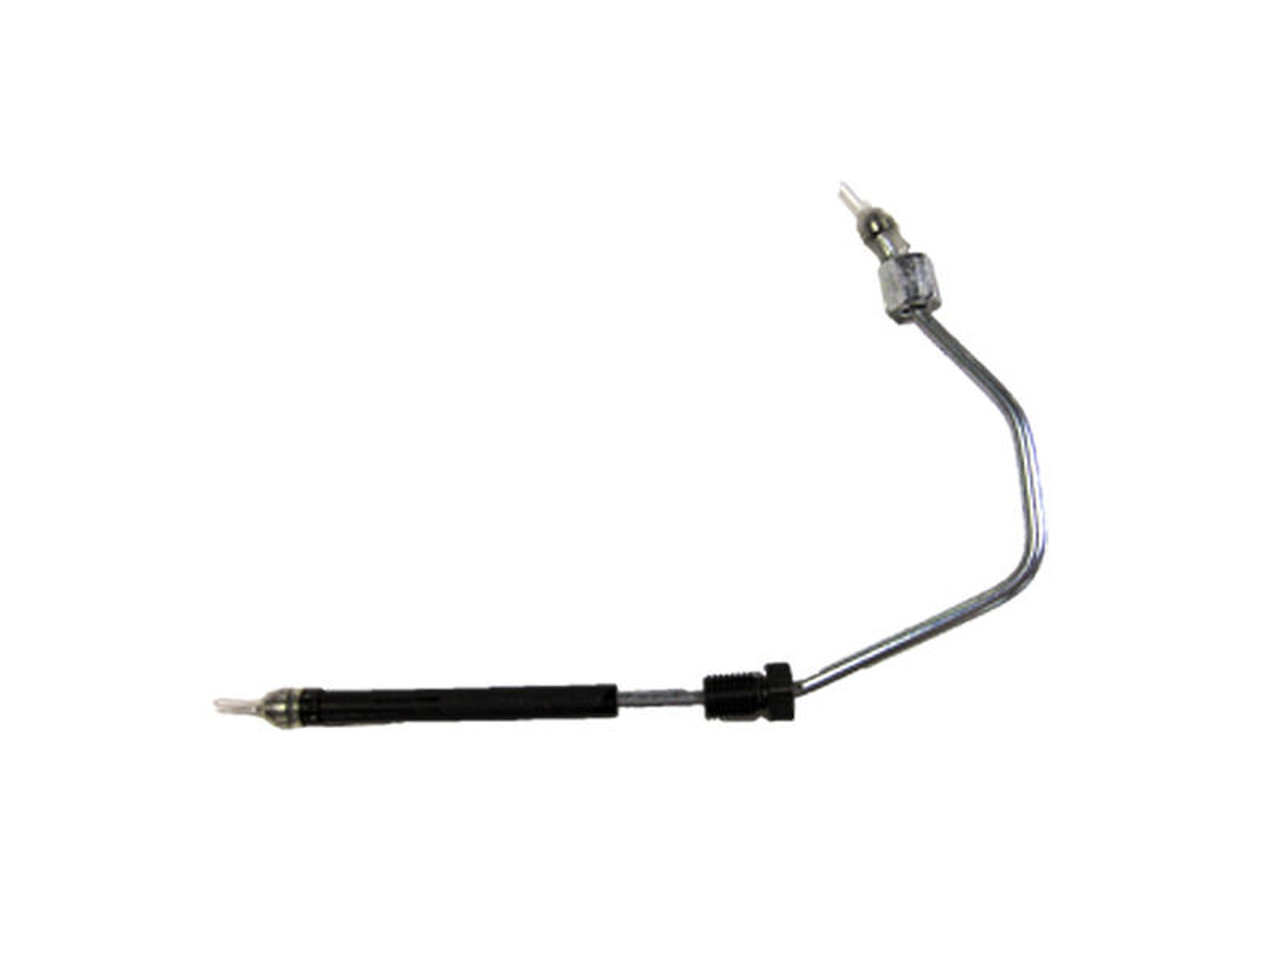 Fuel Injector Tube. Replacement For No. 203GC4383M